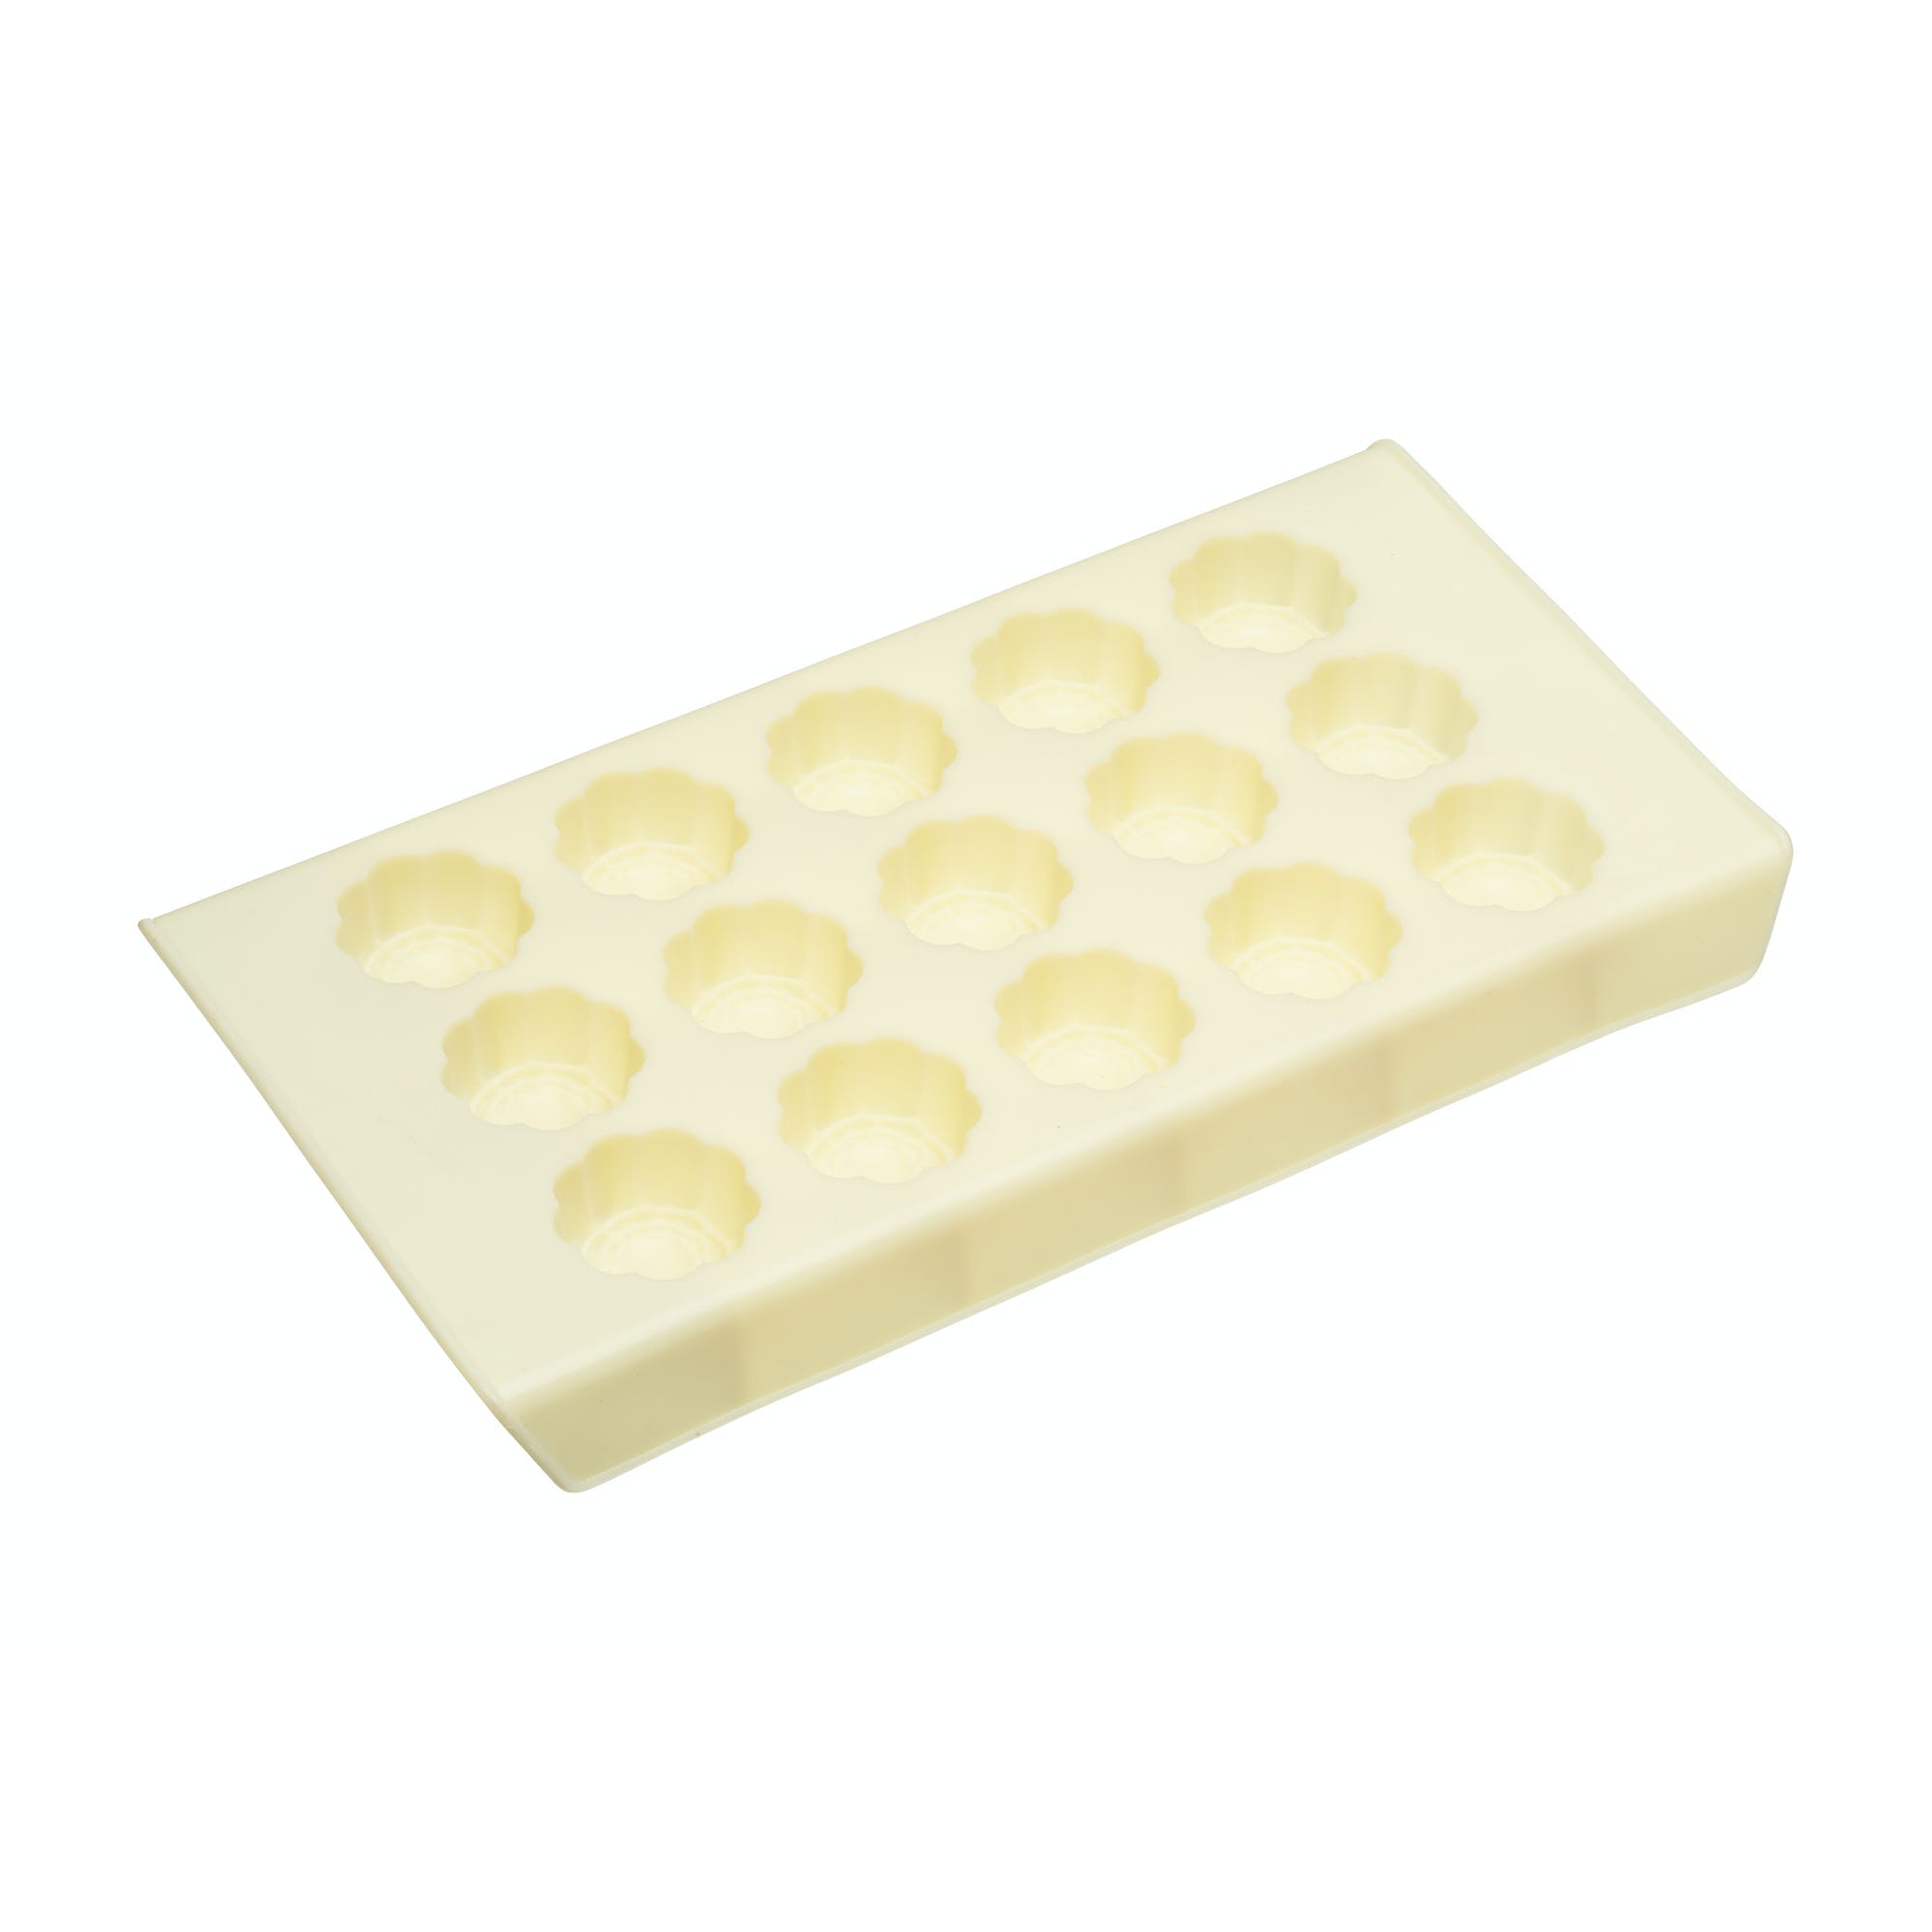 Sweetly Does It Chocolate Roses Silicone Mould - The Cooks Cupboard Ltd